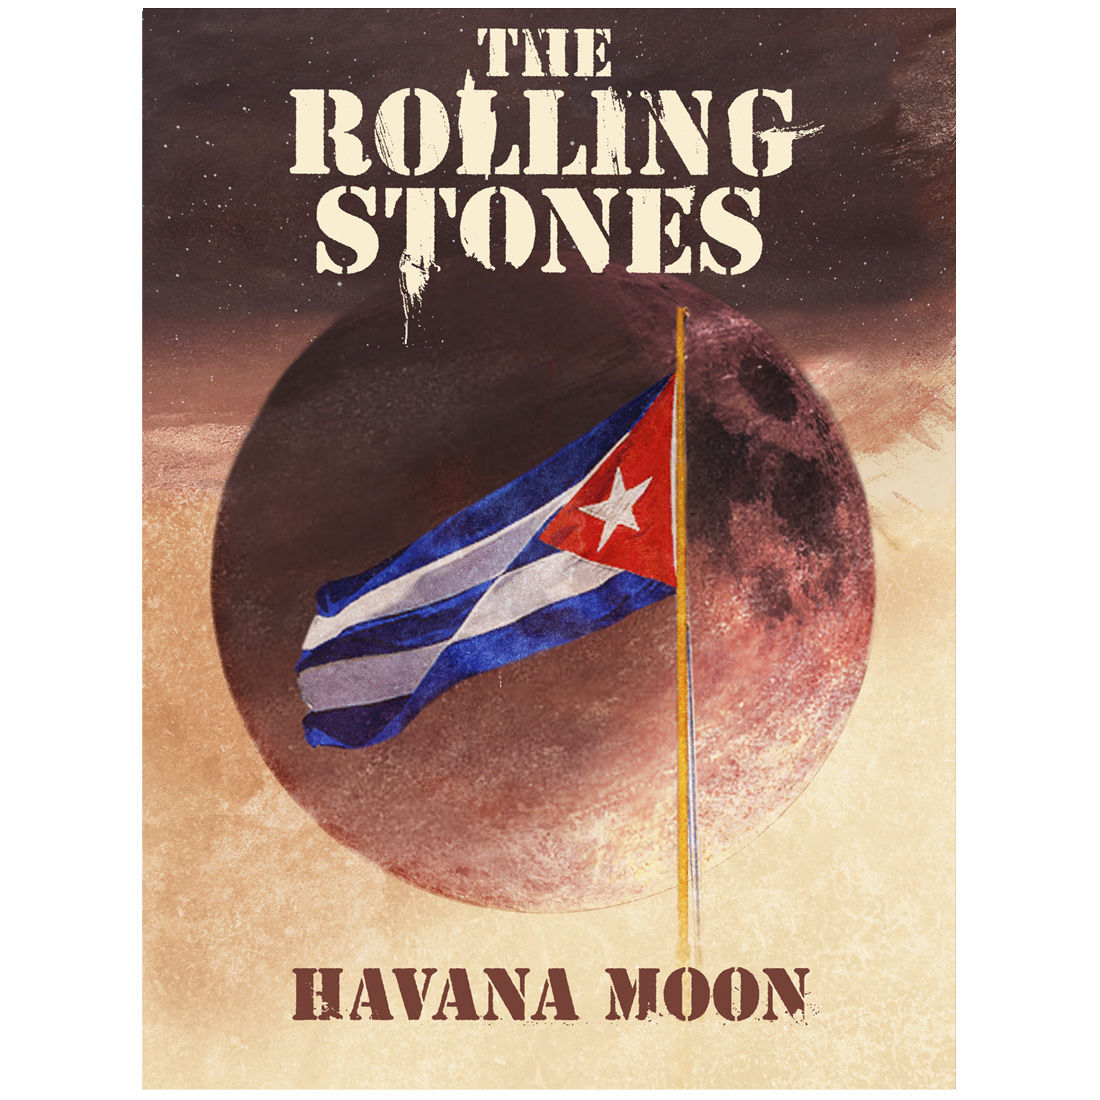 The Rolling Stones - Havana Moon A2 Lithograph